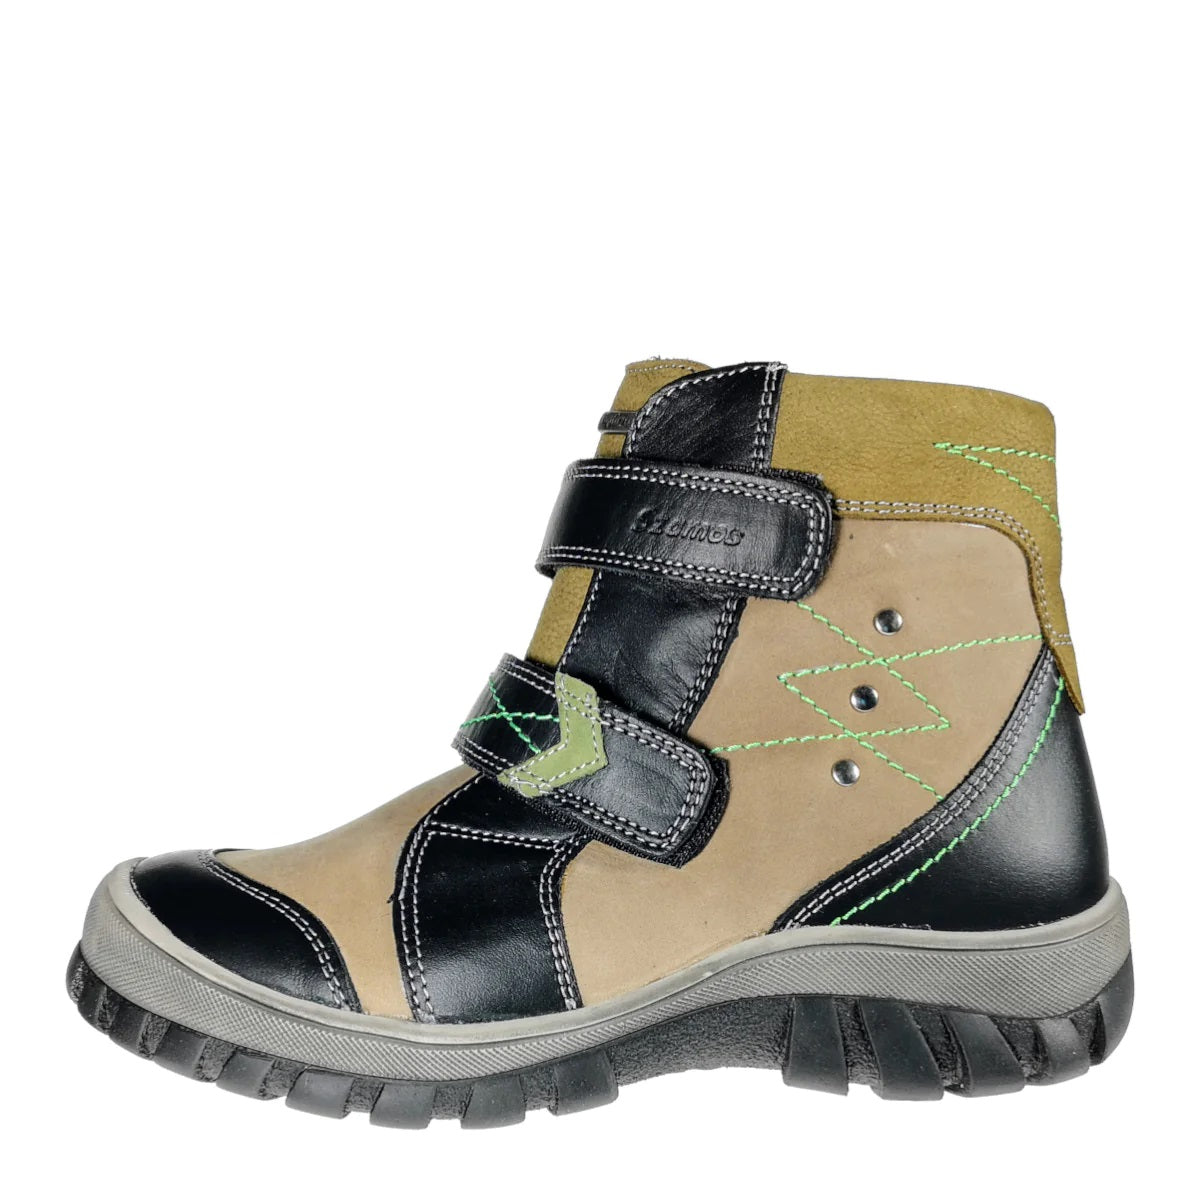 Premium quality boots made from 100% genuine leather lining and upper, khaki with black velcro straps and khaki details. This Szamos Kids product meets the highest expectations of healthy and comfortable kids shoes. The exceptional comfort these shoes provide assure the well-being and happiness of your child.